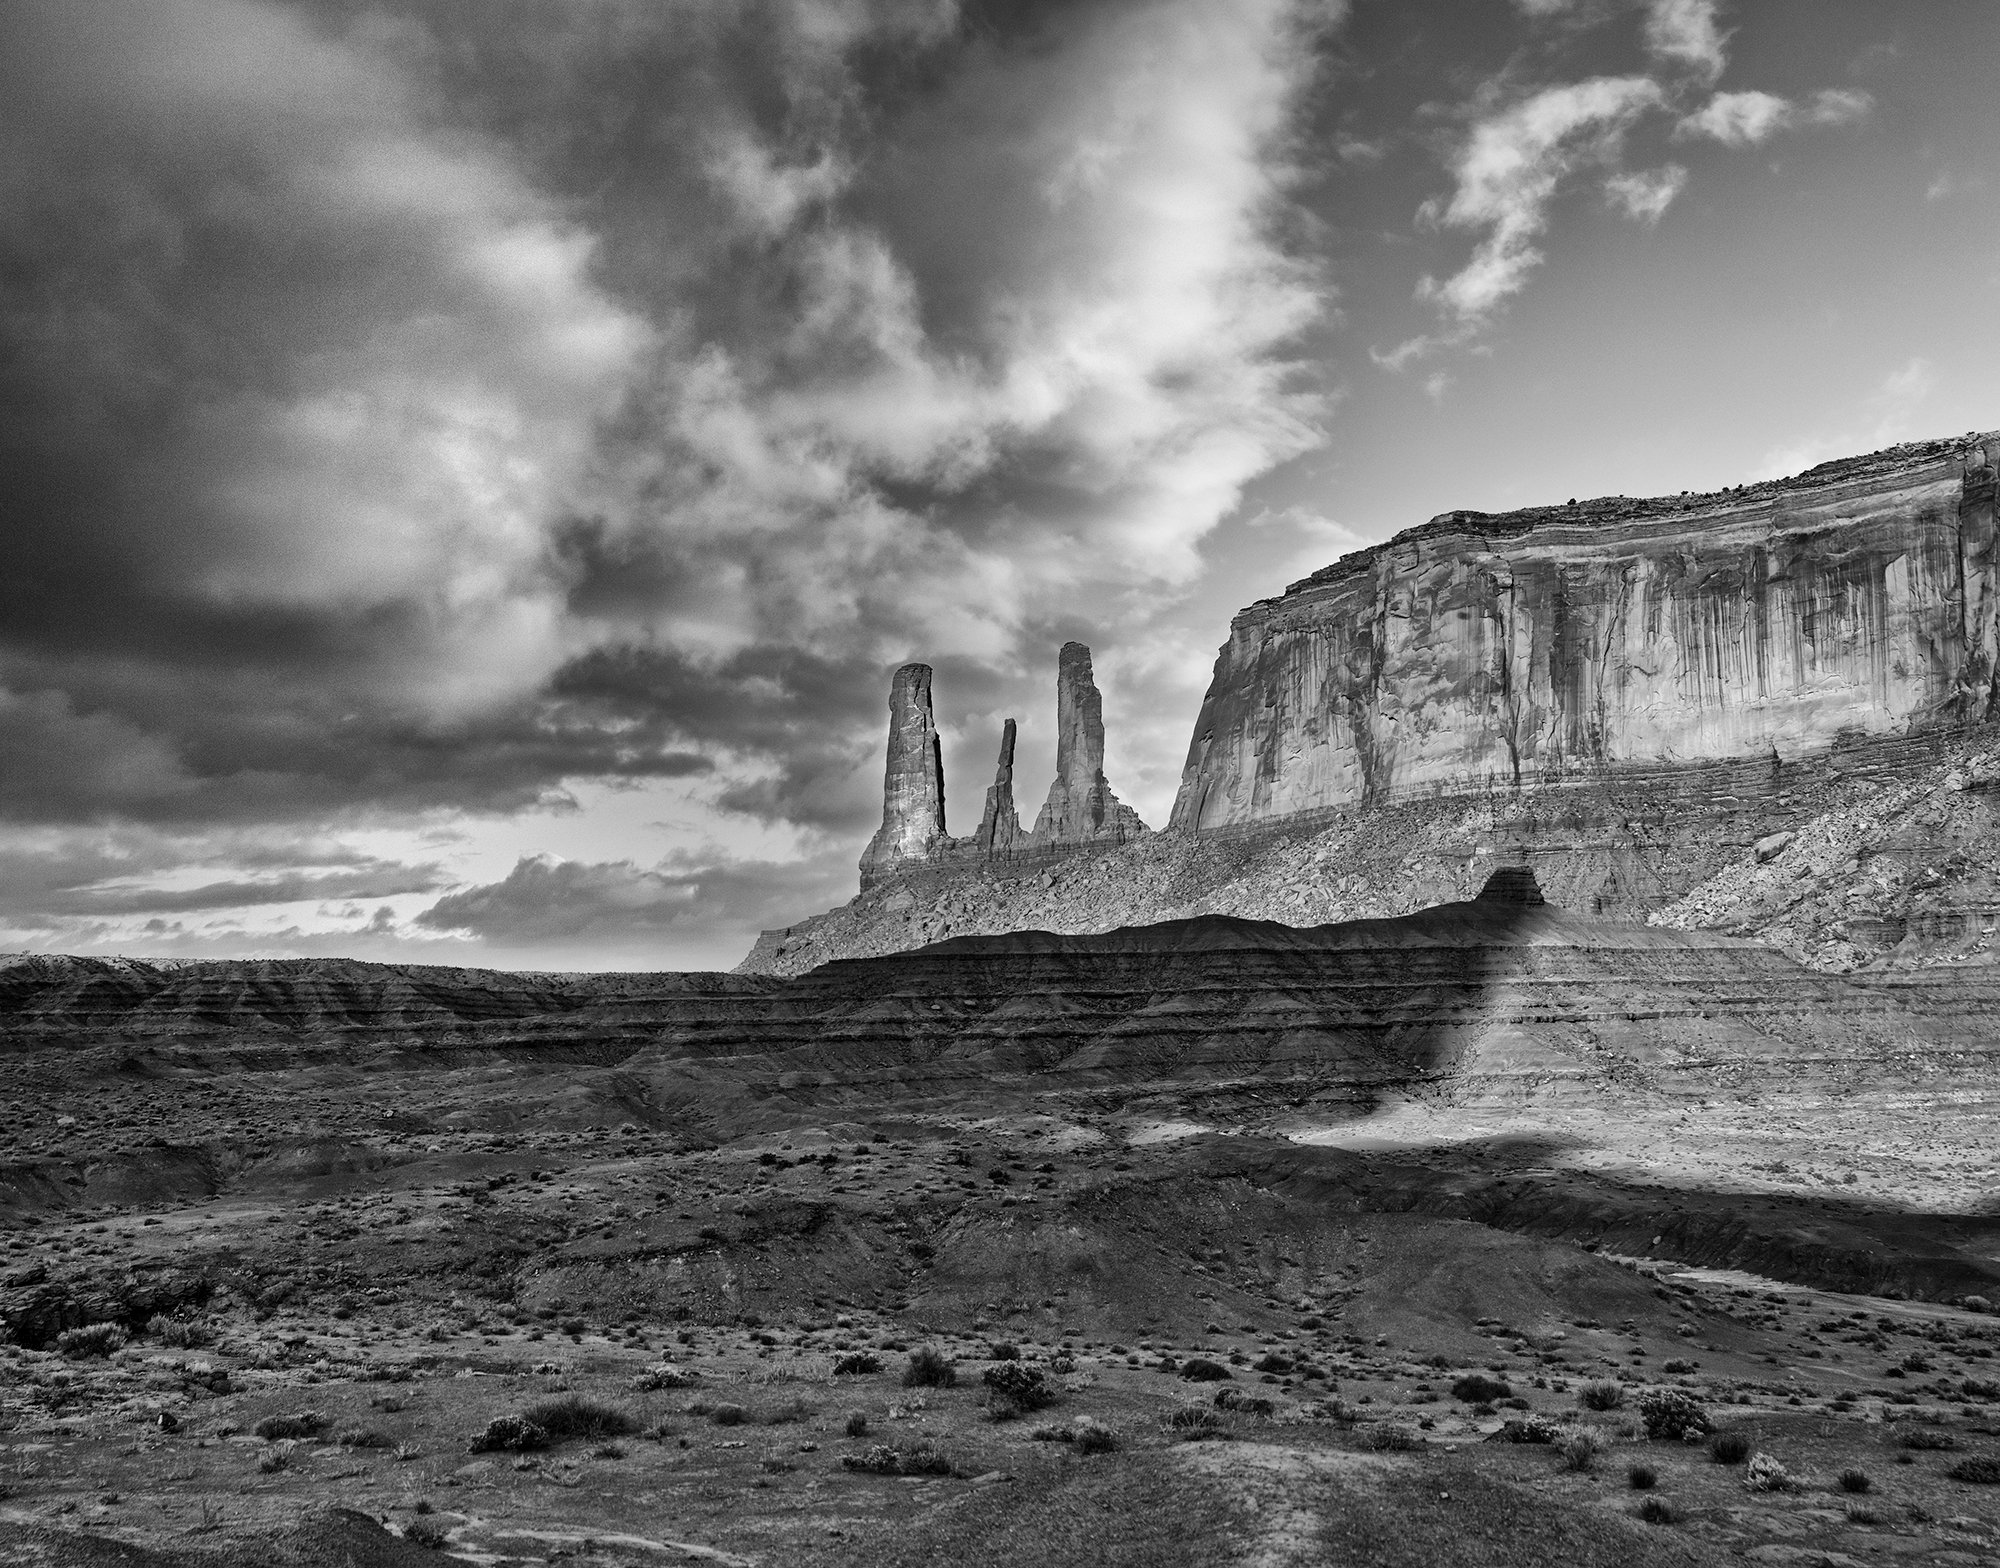 FINE ART PRINTS Page USA-colorado-monument-valley-the-three-sisters-photo-toutain-dorbec.jpg